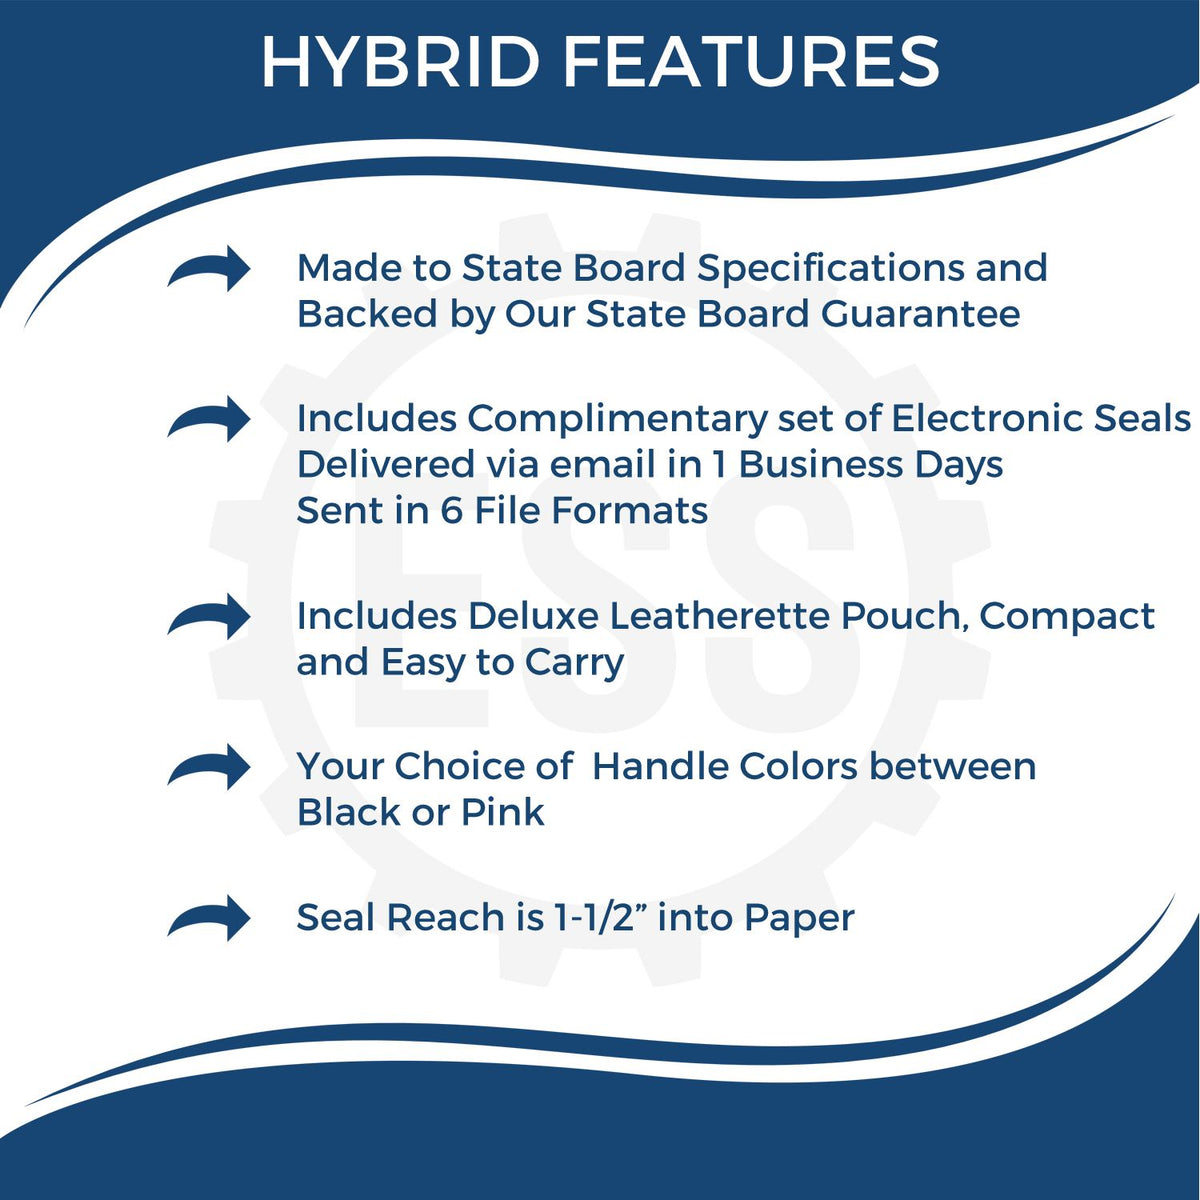 A picture of an infographic highlighting the selling points for the Hybrid Mississippi Engineer Seal